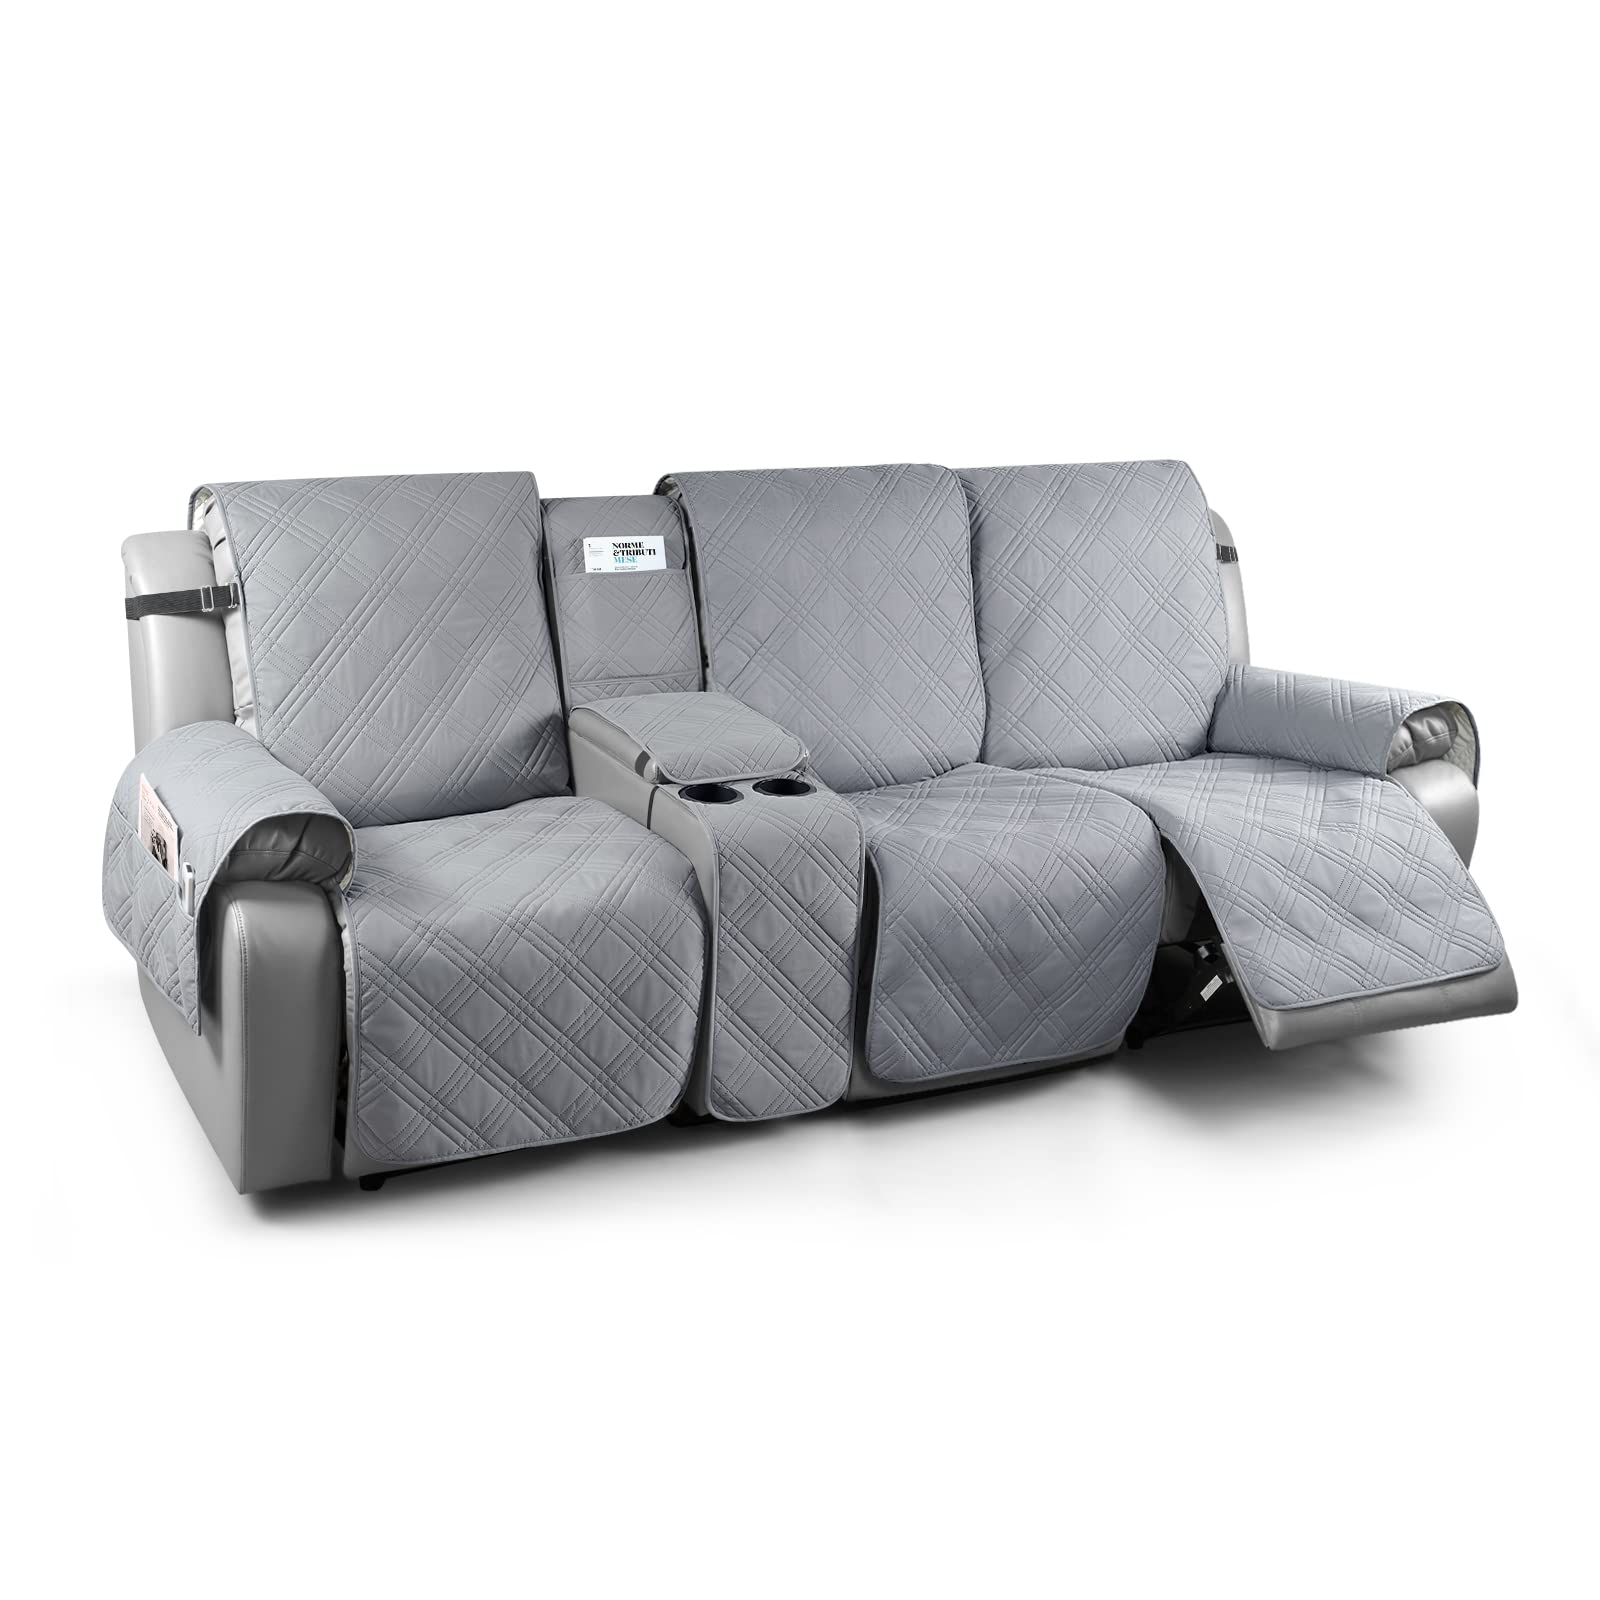 TAOcOcO 100% Waterproof Recliner couch covers with console, Sofa covers for Reclining Sofa 3 Seat with Straps Design, Split Recl